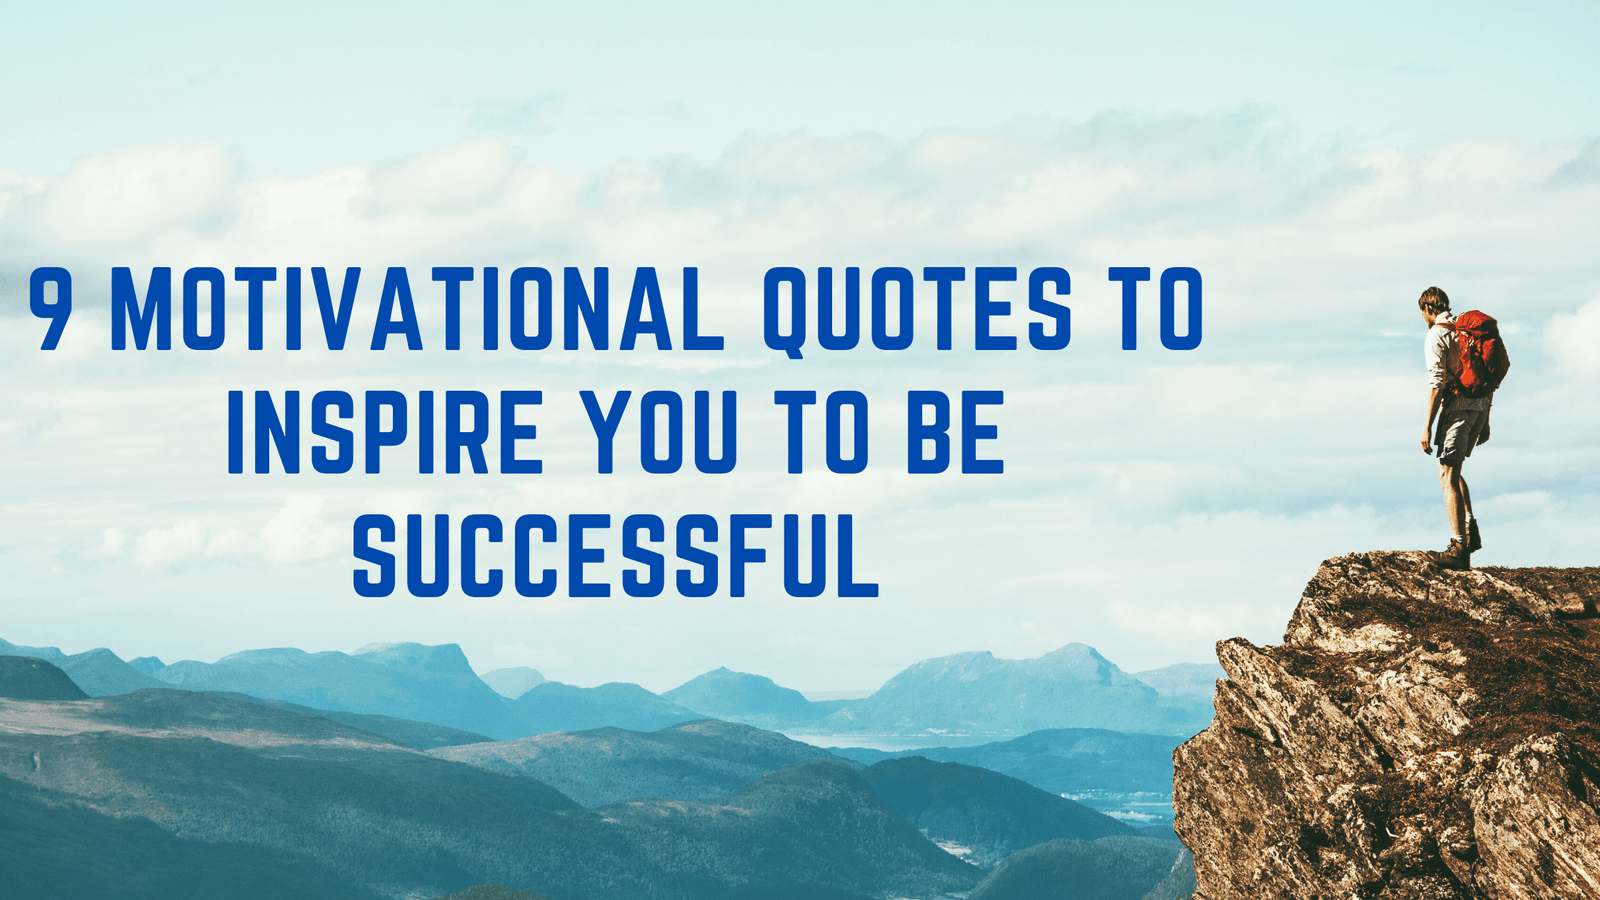 9 Motivational Quotes to Inspire You to Be Successful - Trending Media Buzz